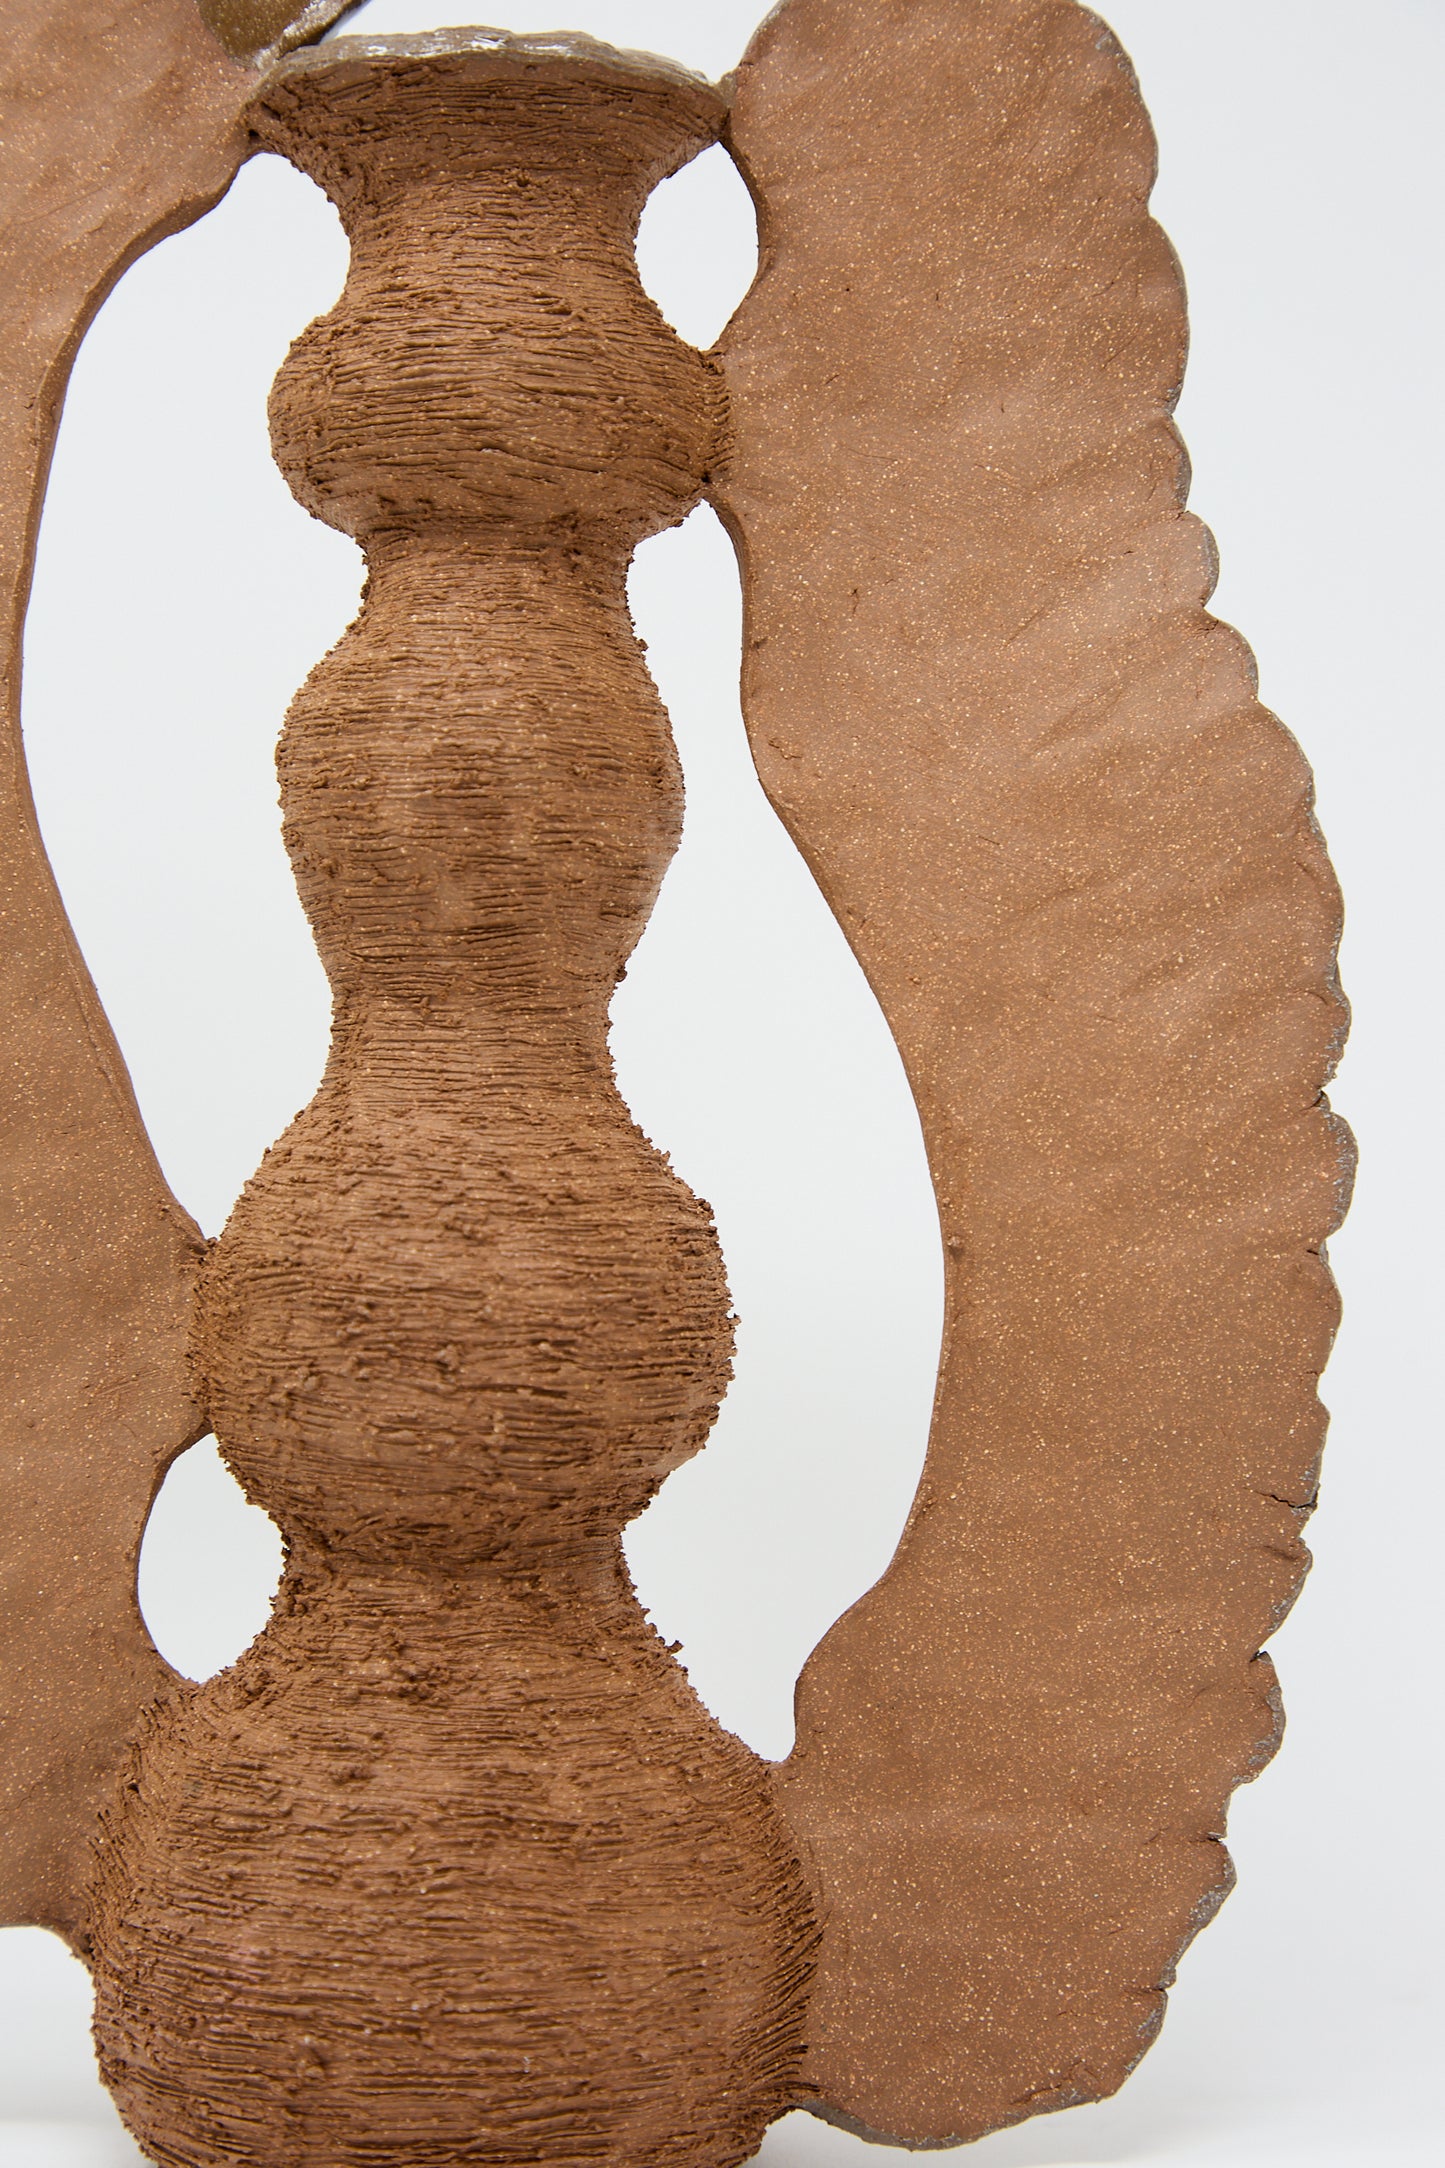 Close-up of a textured, abstract clay sculpture featuring a central column with stacked bulbous shapes and two wing-like extensions on either side, reminiscent of Tania Whalen's The Flying Ra Vase. The predominantly brown sculpture showcases intricate detailing and craftsmanship.